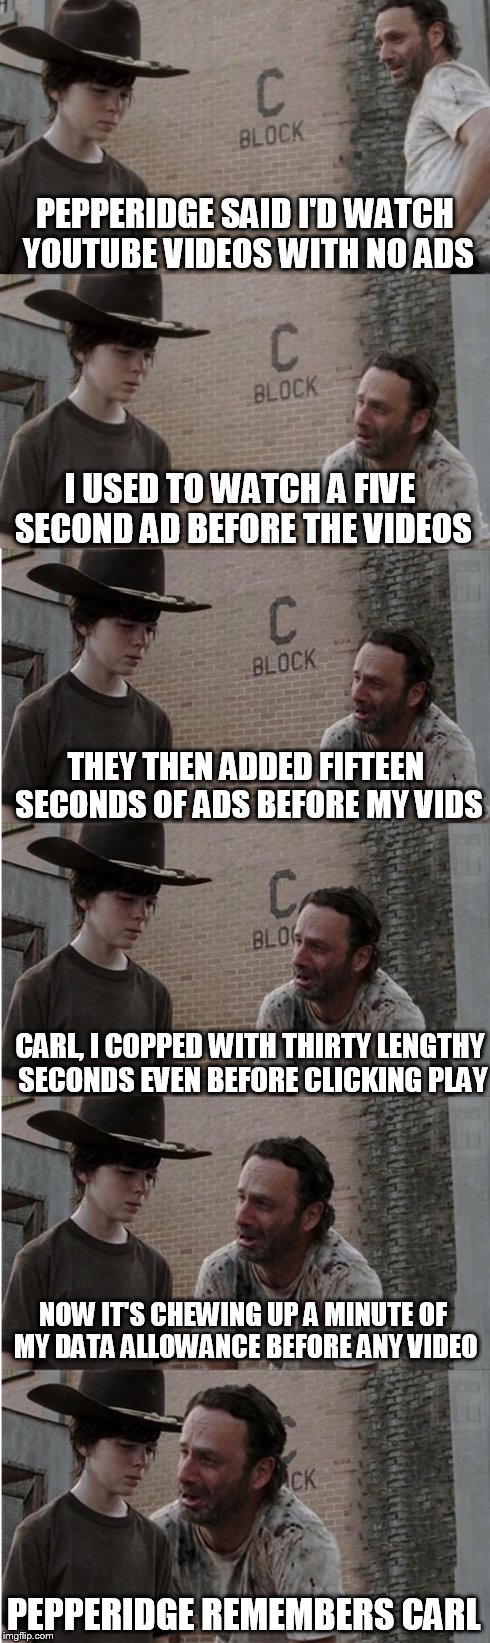 Rick and Carl Longer Meme | PEPPERIDGE SAID I'D WATCH YOUTUBE VIDEOS WITH NO ADS I USED TO WATCH A FIVE SECOND AD BEFORE THE VIDEOS THEY THEN ADDED FIFTEEN SECONDS OF A | image tagged in memes,rick and carl longer | made w/ Imgflip meme maker